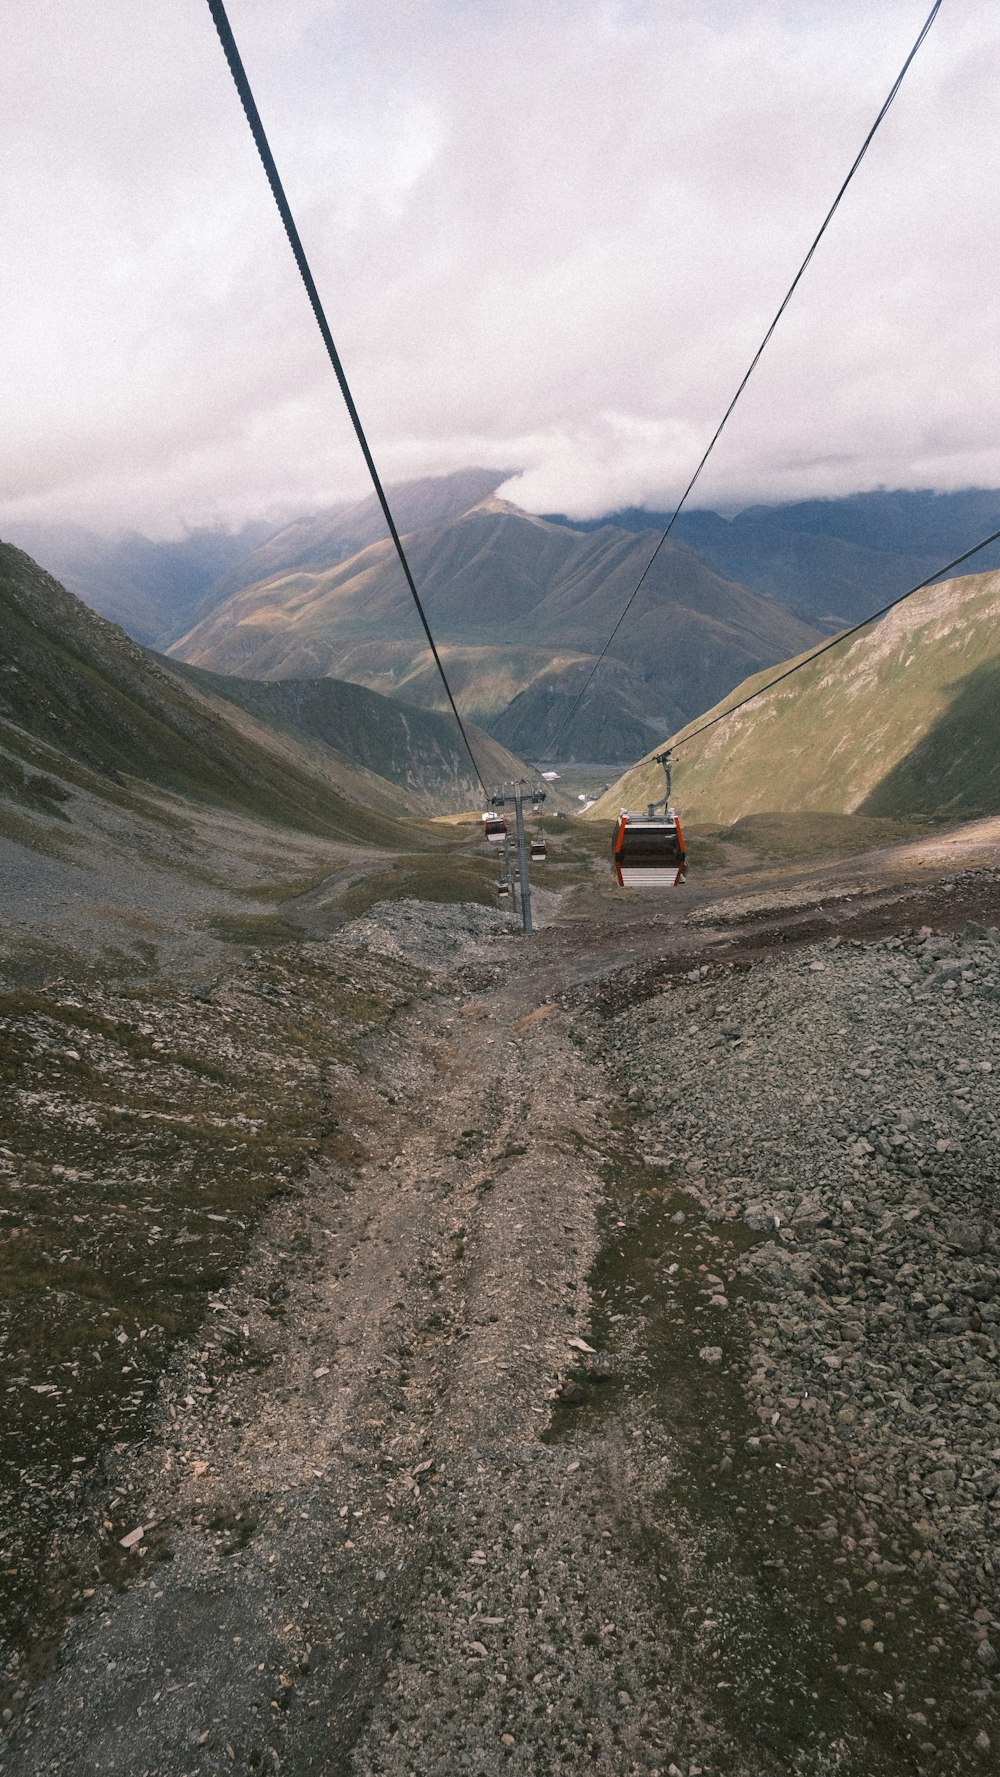 a view of a mountain with a cable car going up it